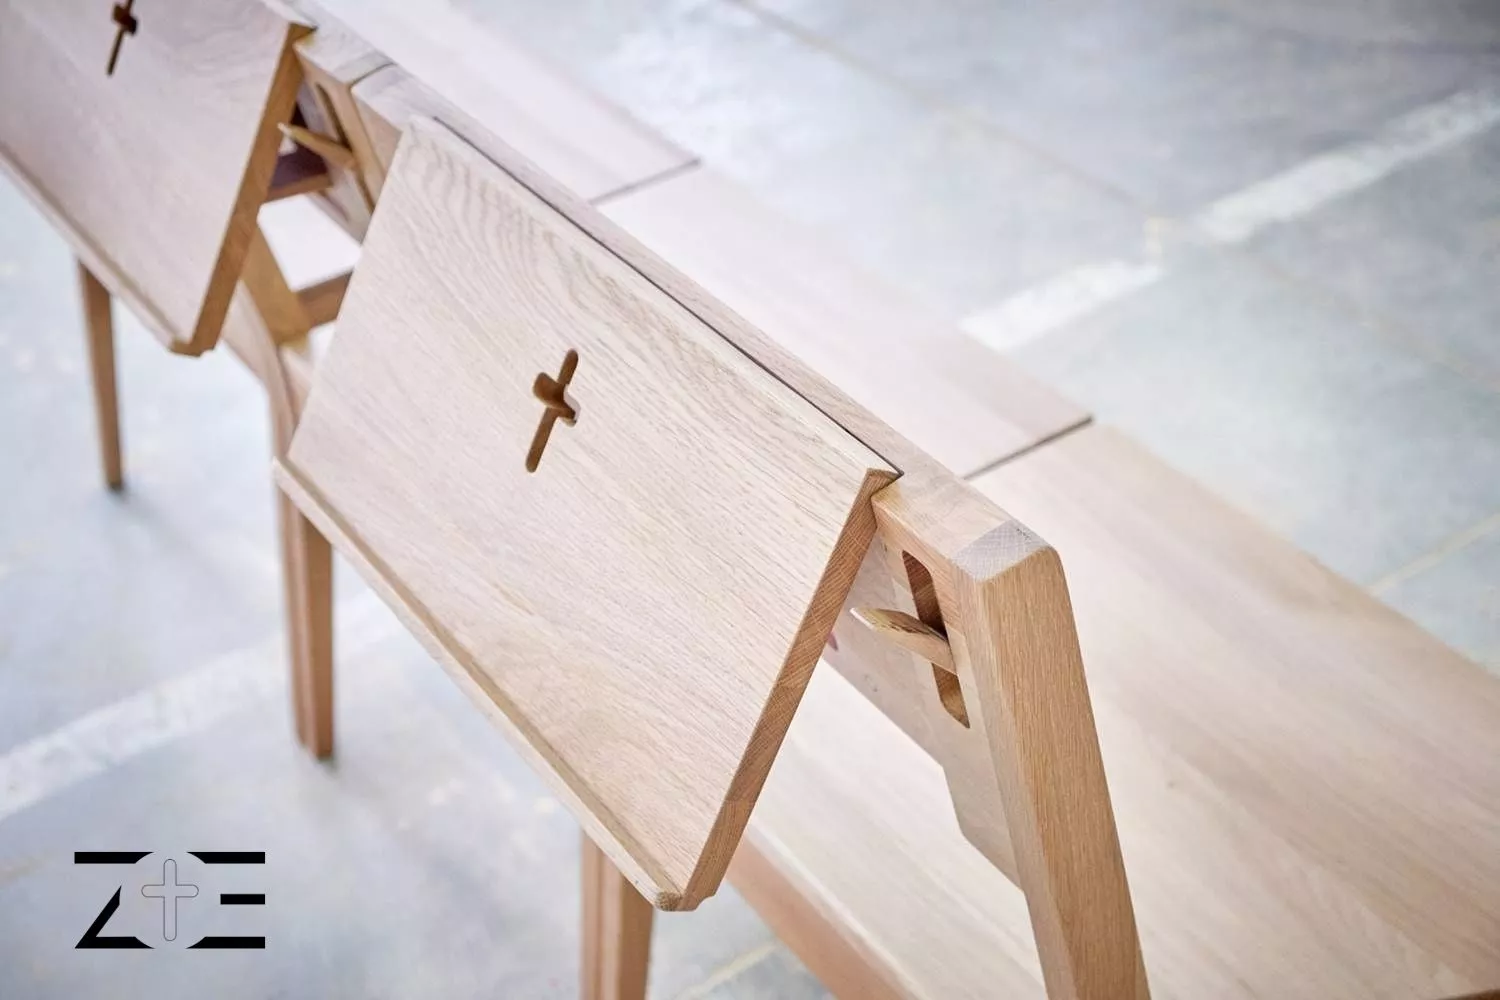 Church chairs ZOE connected by magnets into one bench unit with a logo in the lower left corner of the photo